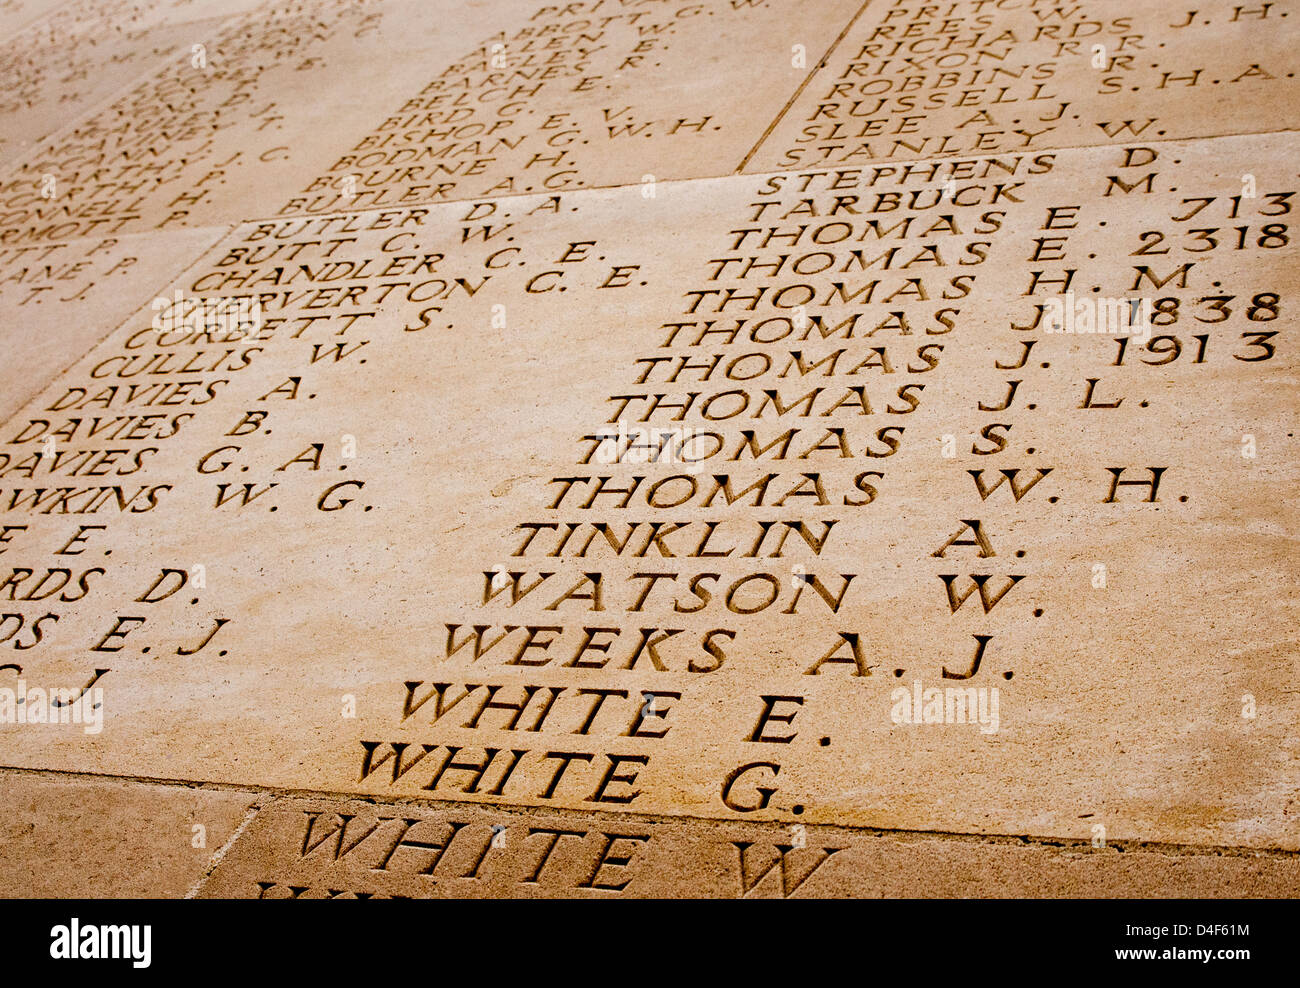 Names of the Missing from the World War One Battle of The Somme on The Thiepval Memorial, Picardie, France Stock Photo